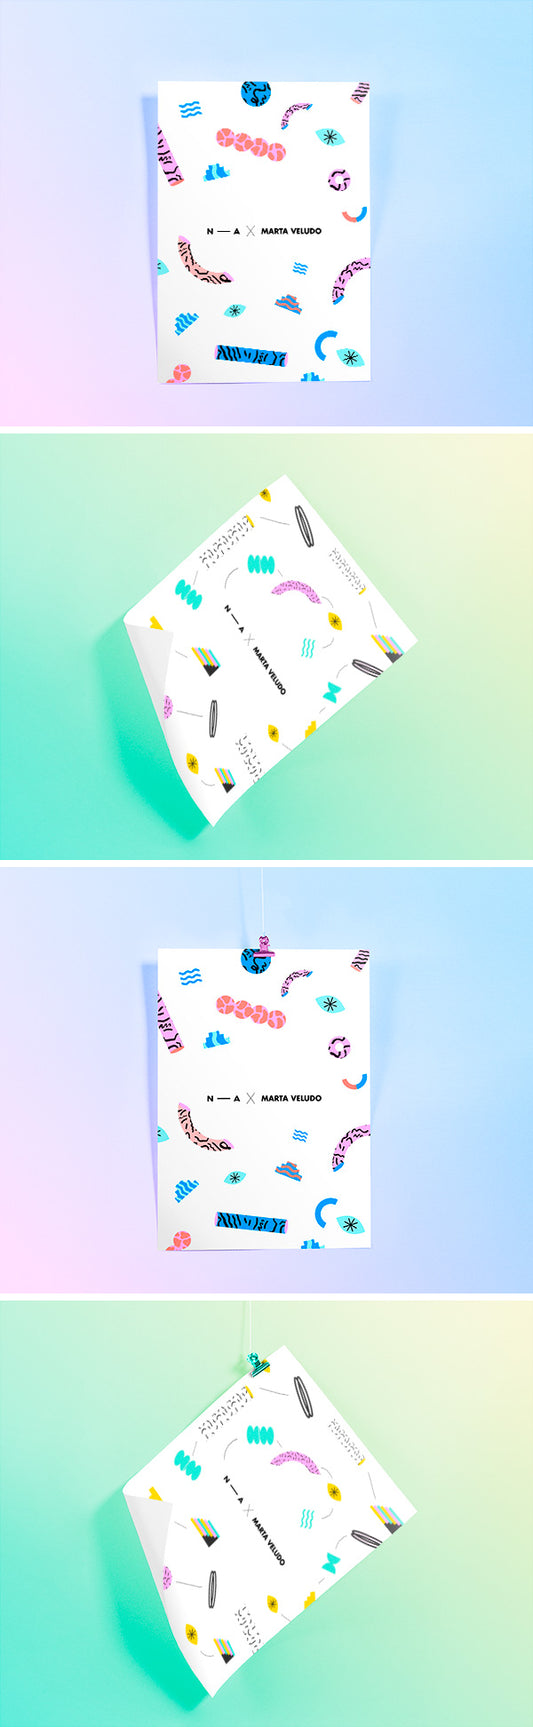 Free Set of 2 Clean Poster MockUps PSD